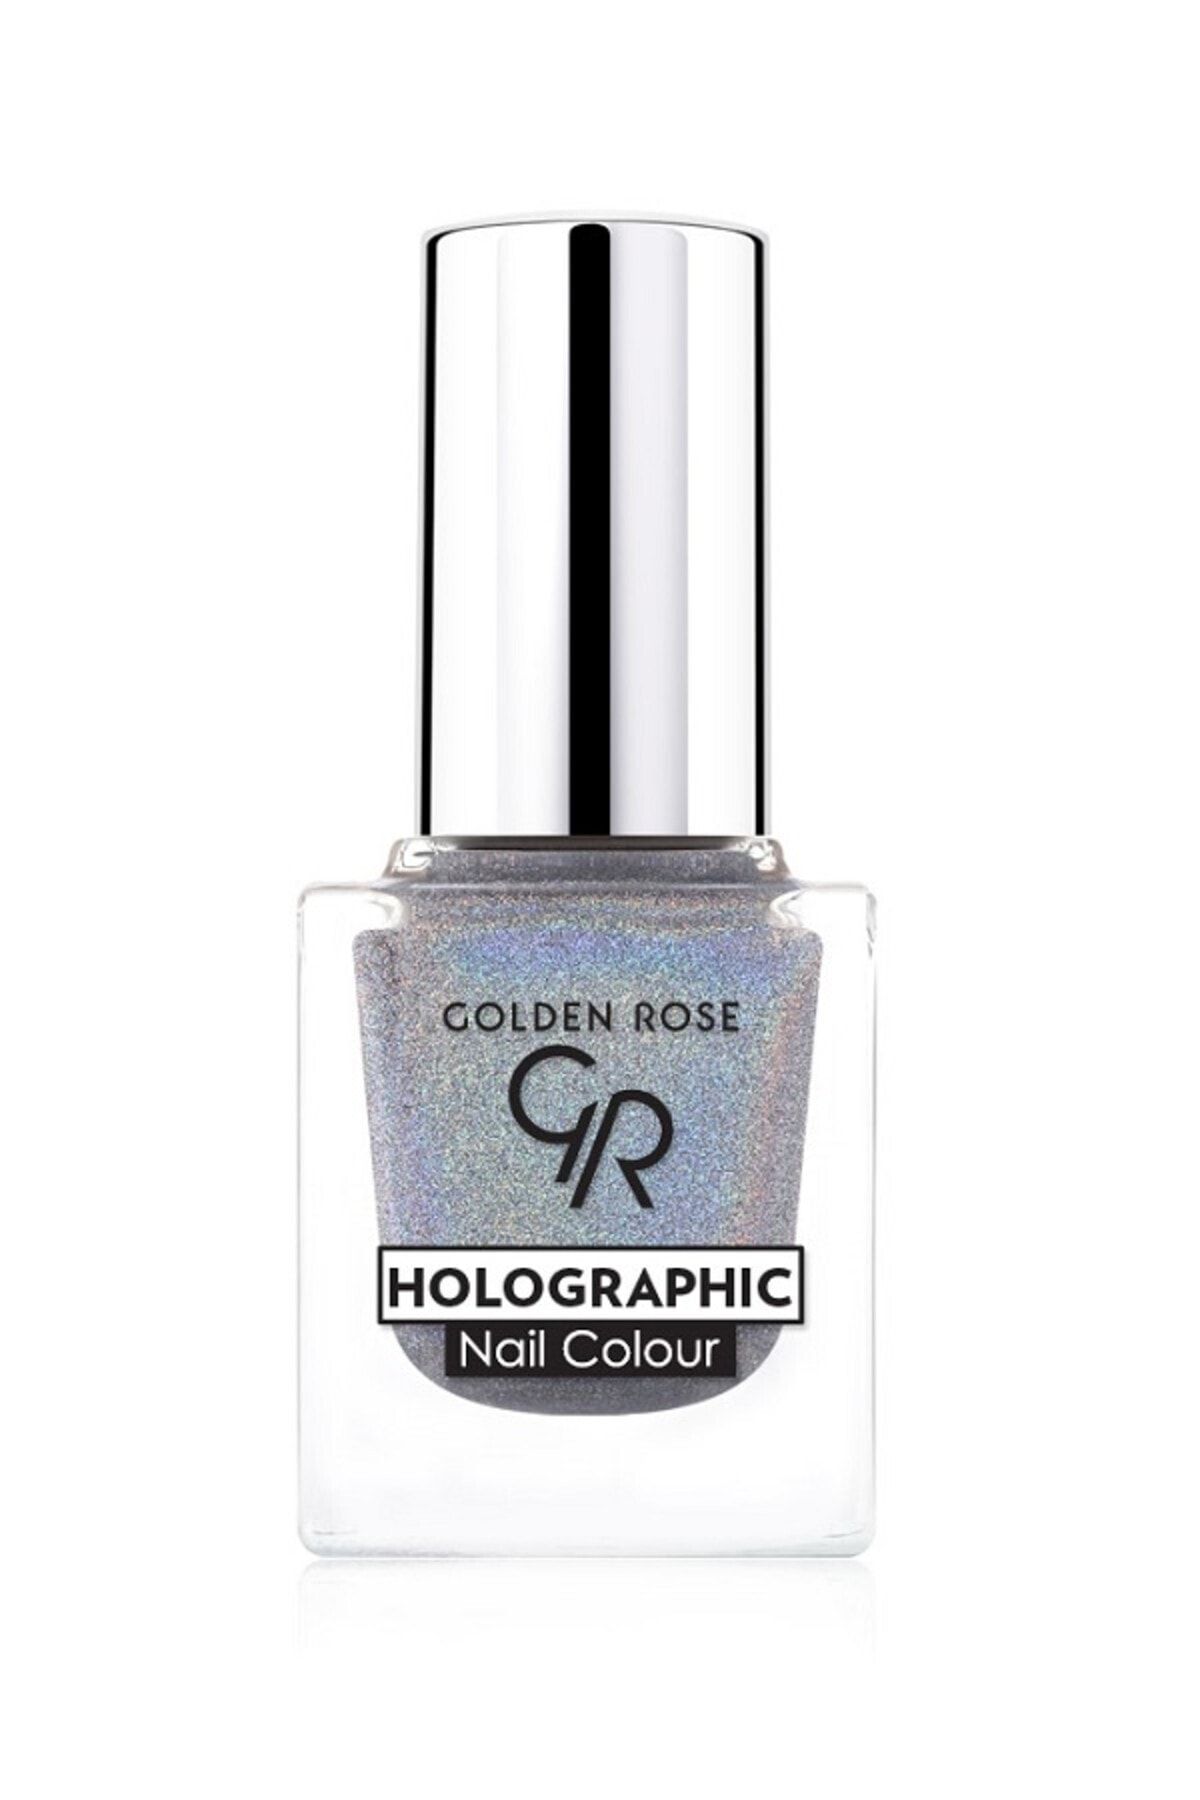 Golden Rose Oje - Holographic Nail Colour No: 07 8691190764074